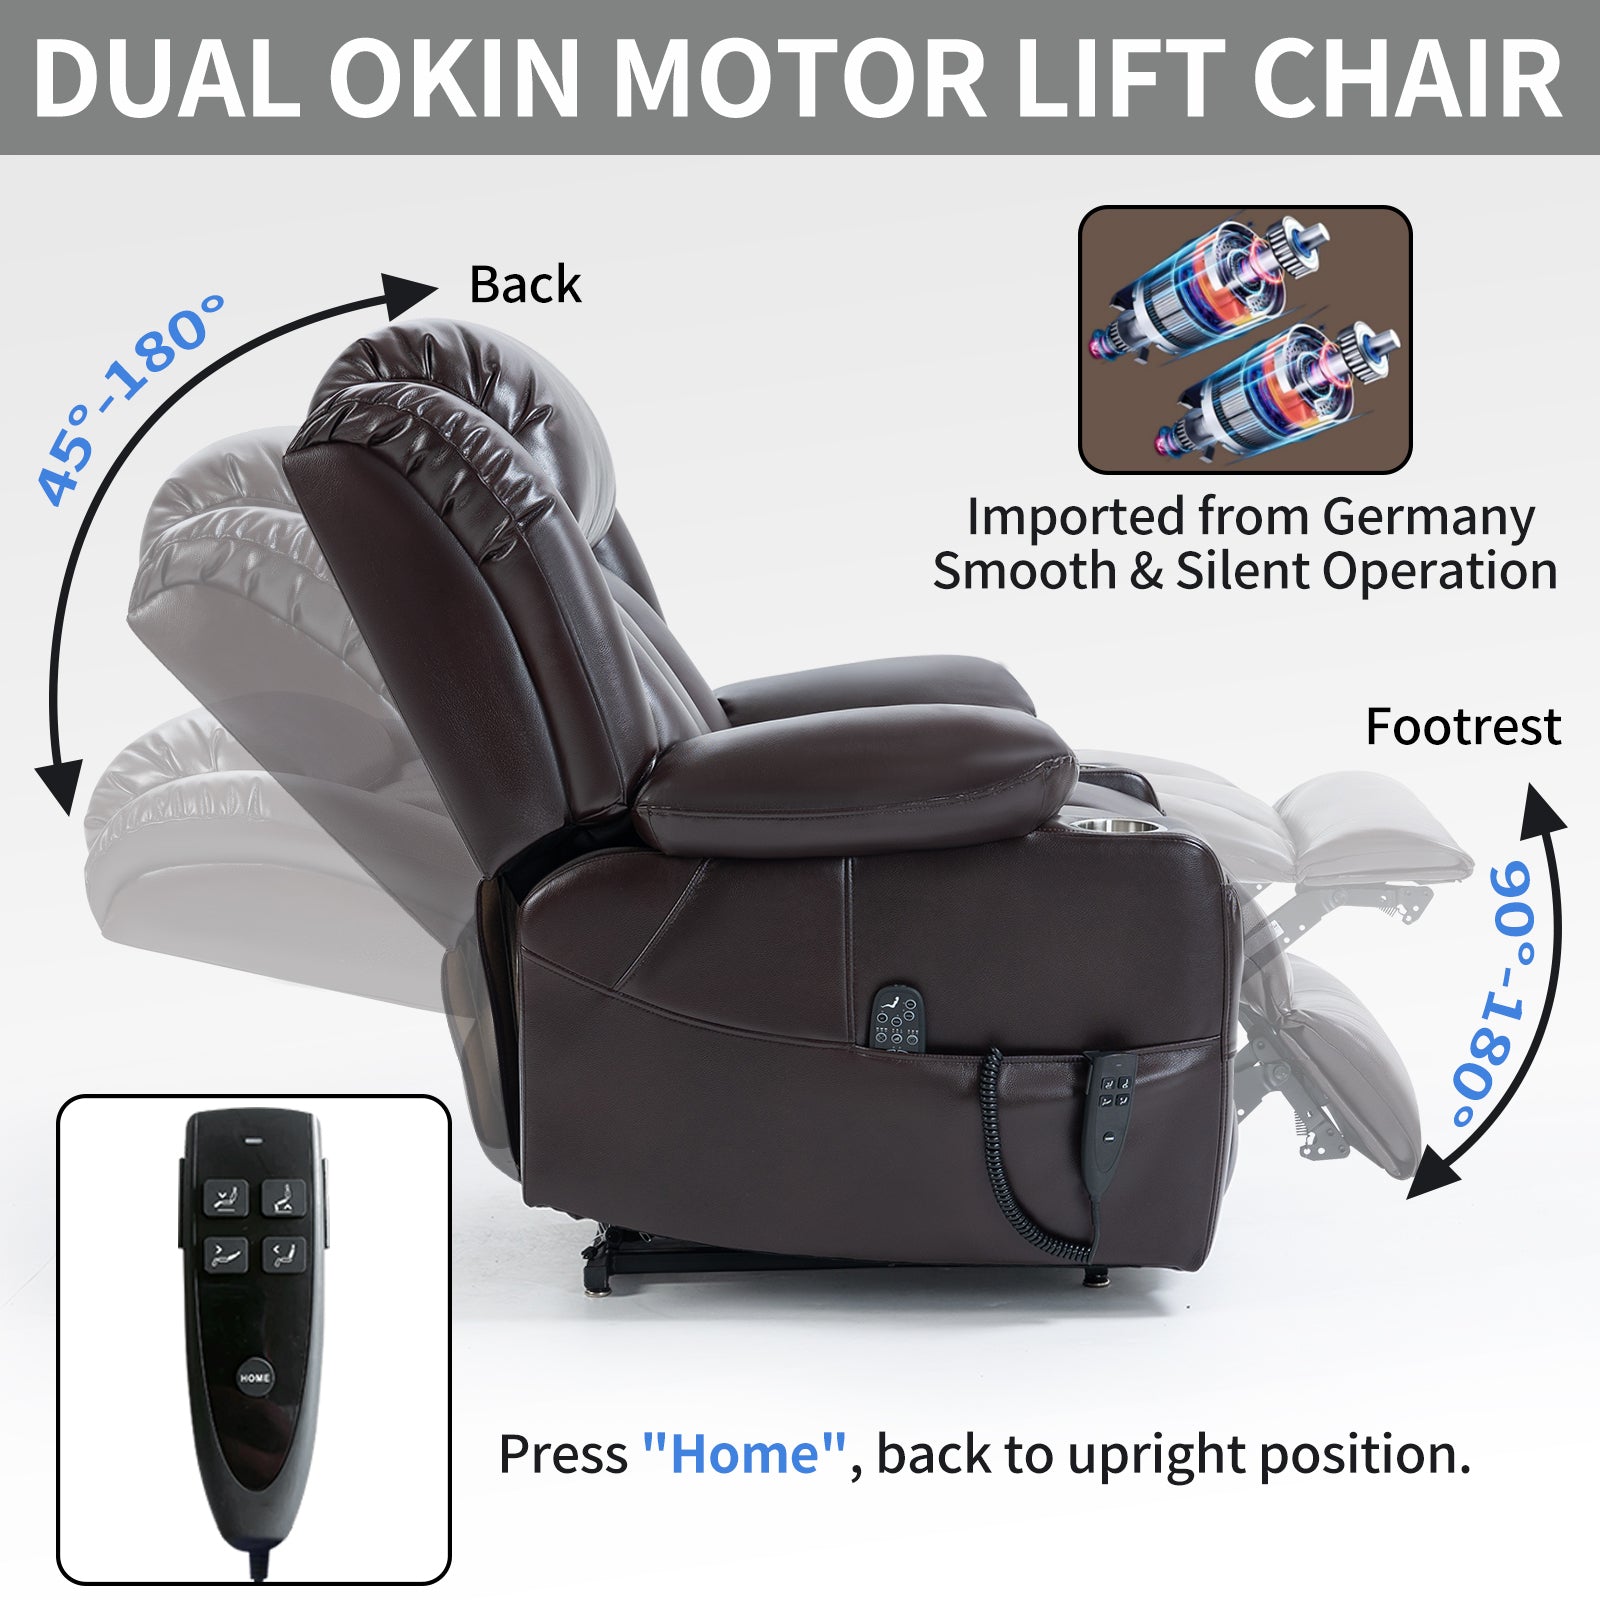 Samuel Faux Leather Power Lift Recliner Chair with Massage and Lumbar Heating